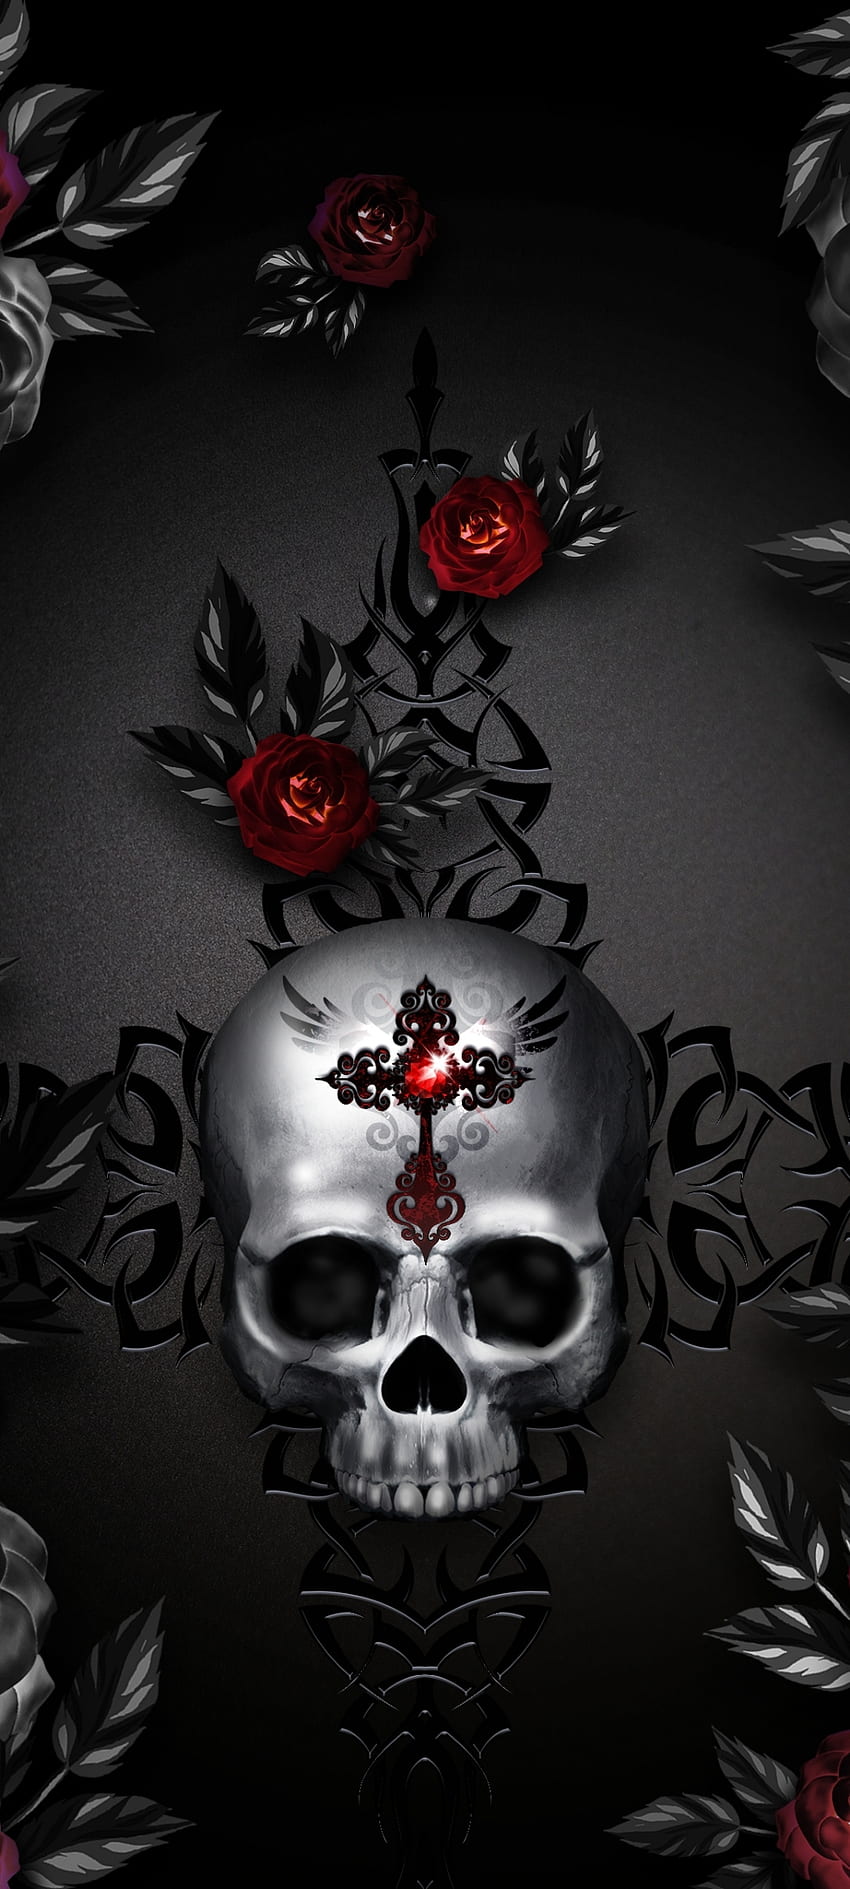 hd skulls with roseswallpapers  Google Search  Skull wallpaper Skulls  and roses Goth wallpaper